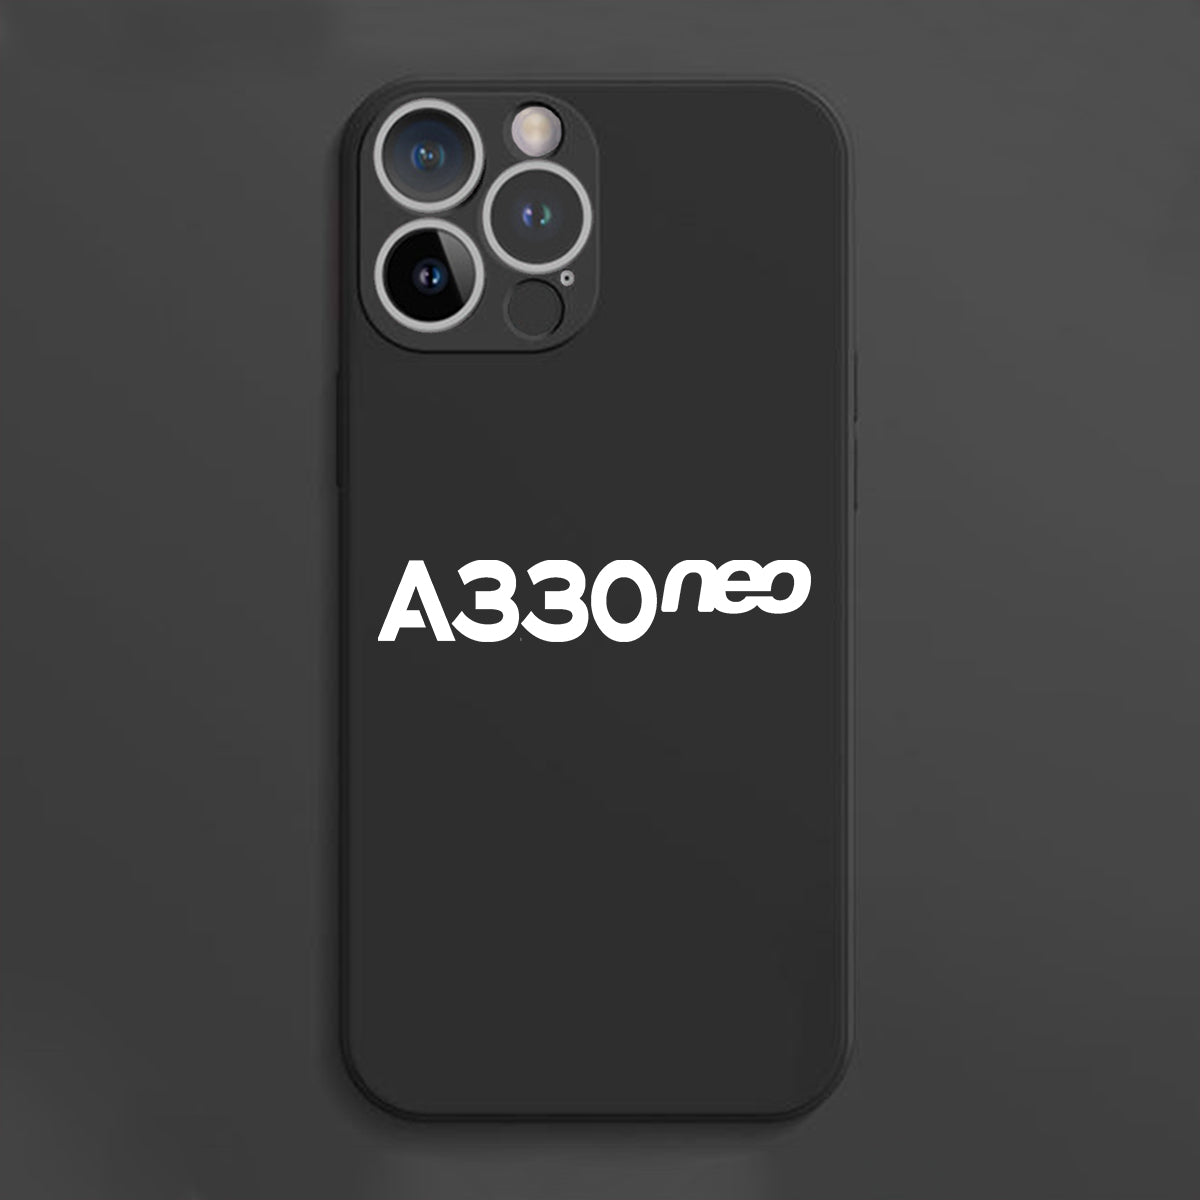 A330neo & Text Designed Soft Silicone iPhone Cases